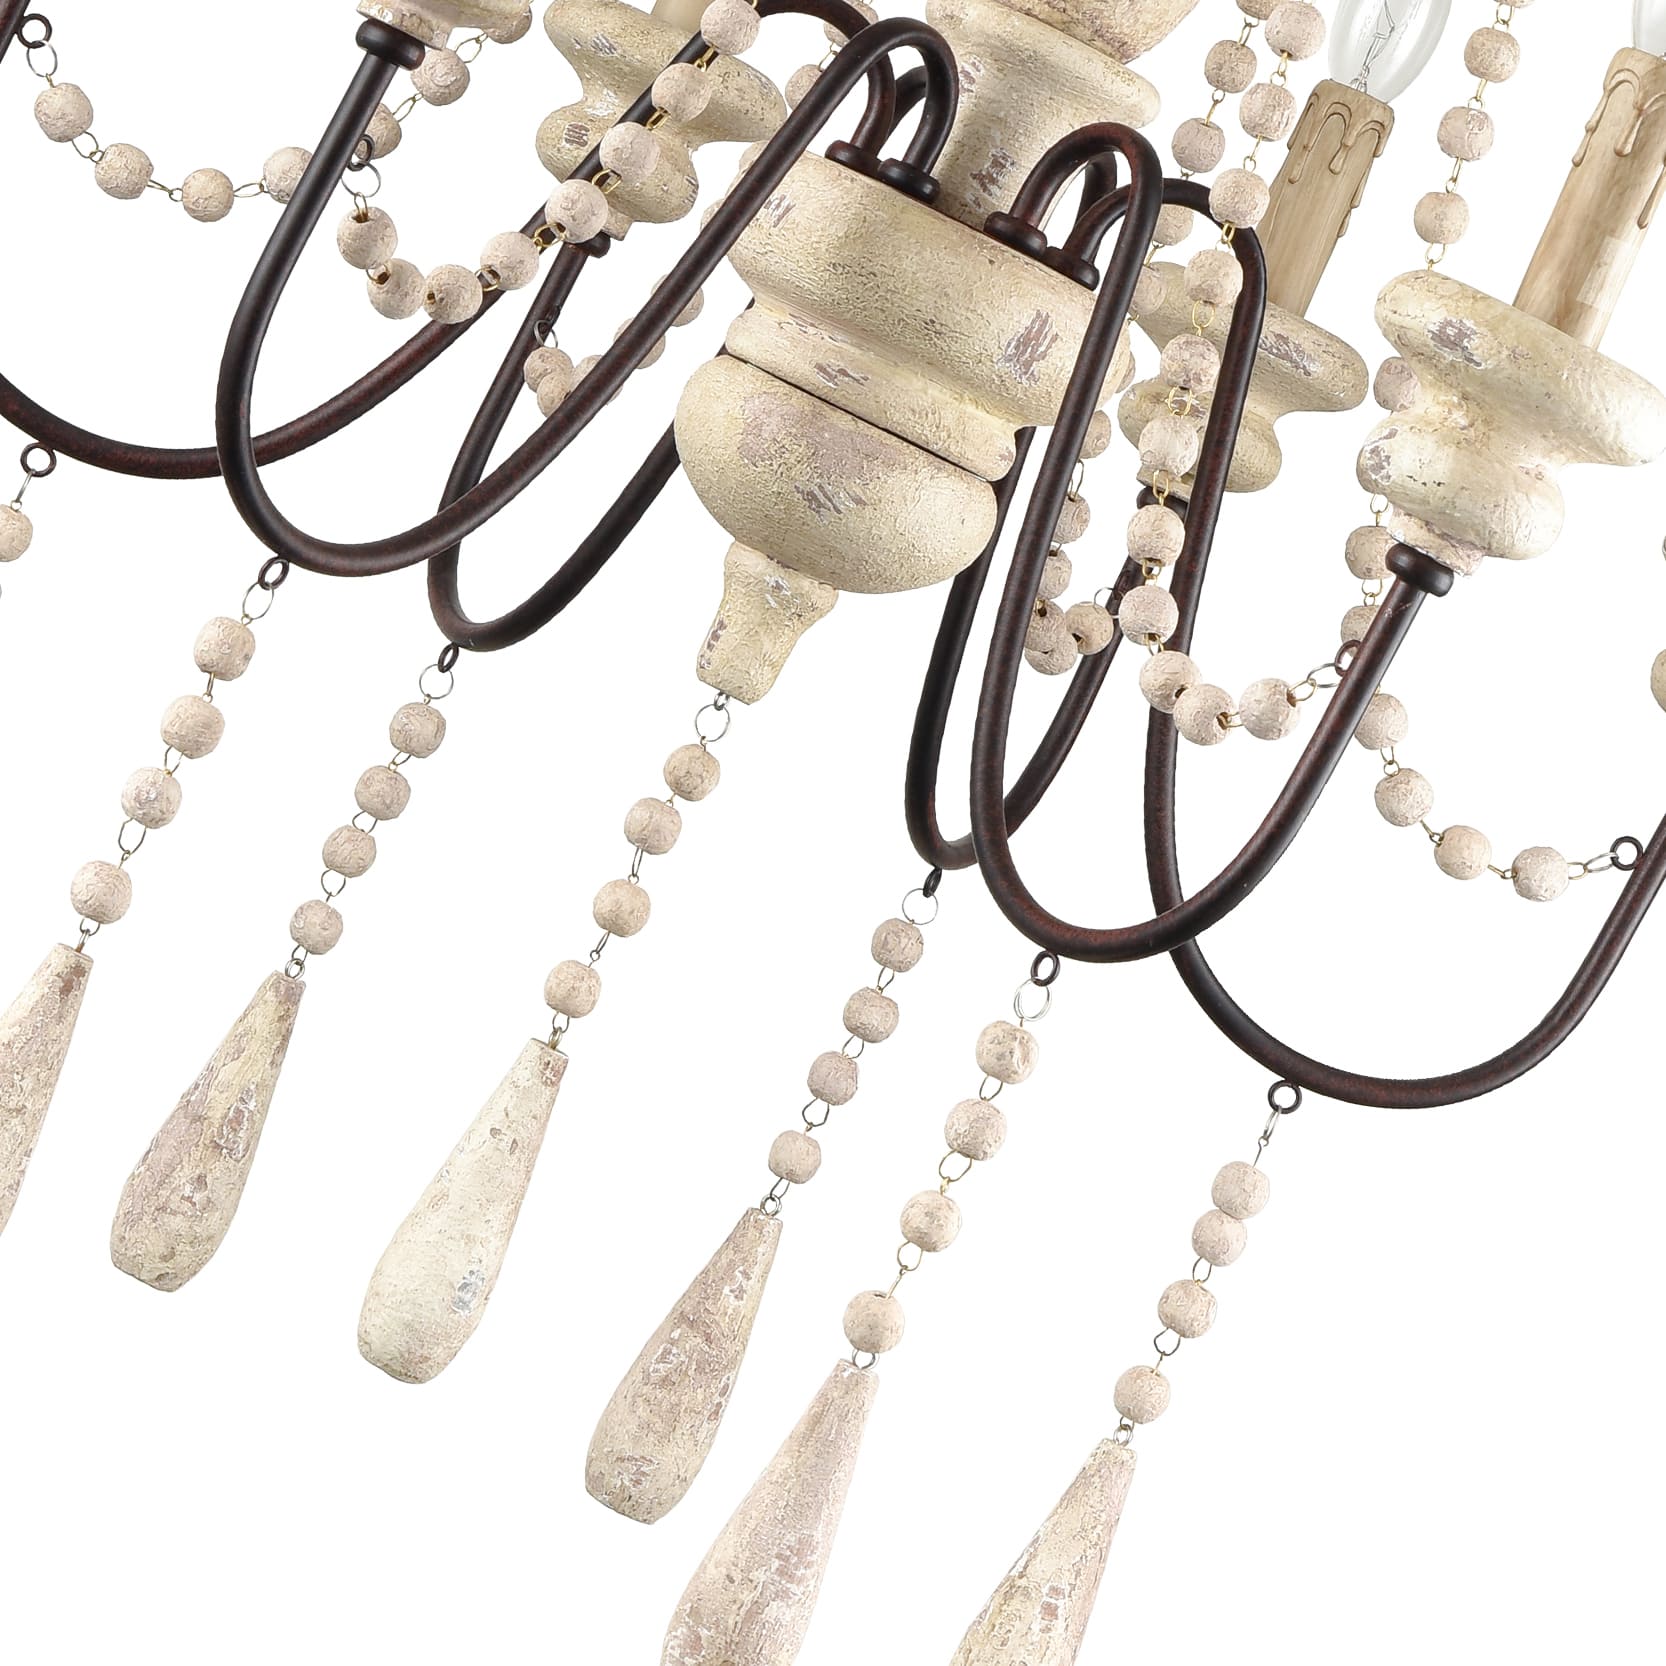 Handmade Distressed Candle Chandelier with  6 Lights